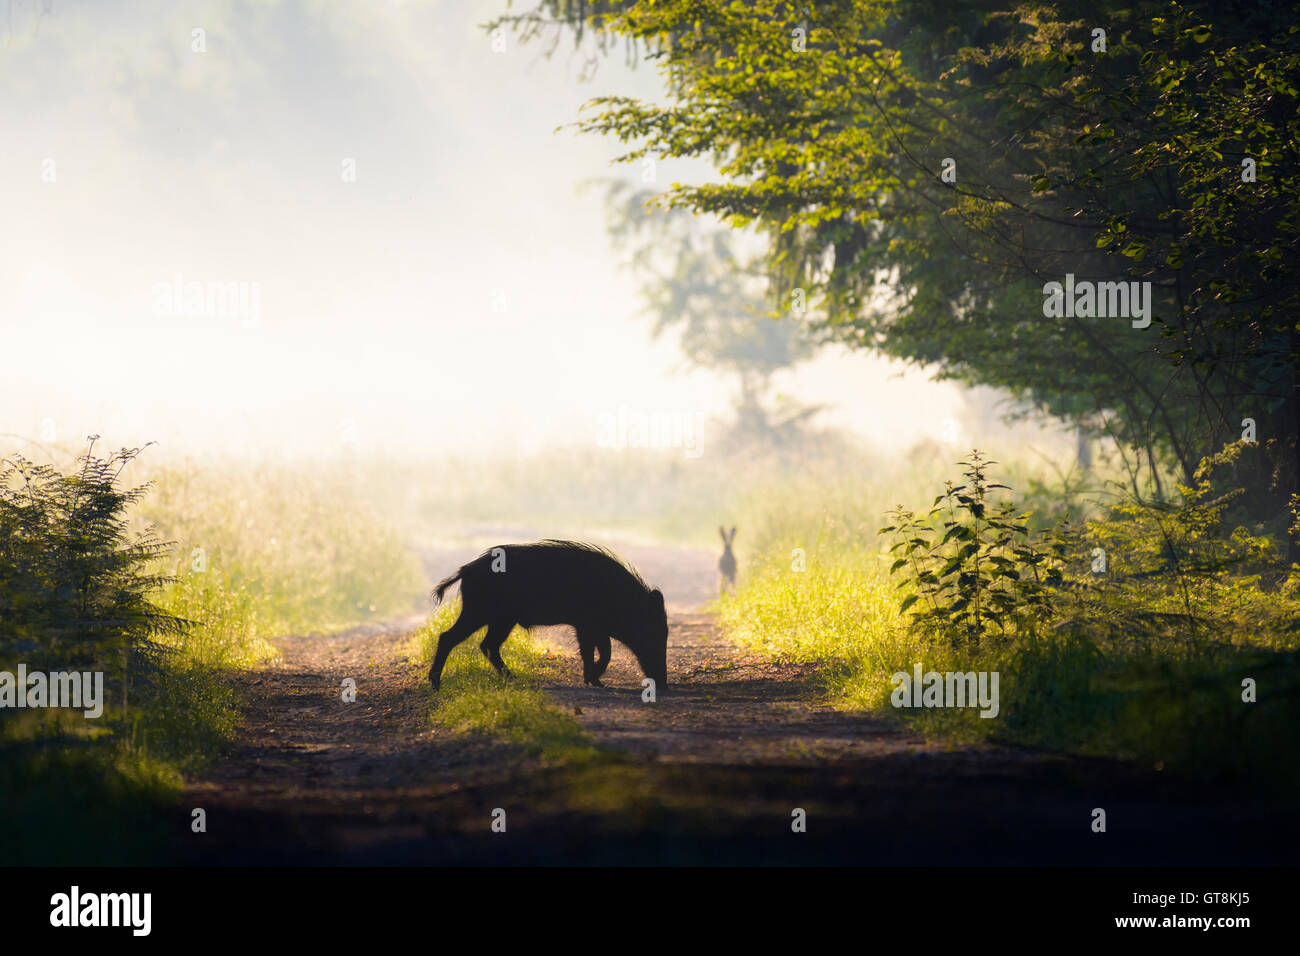 Silhouette of wild boar on a dirt road on a misty morning with European Brown Hare looking on in the background, Hesse, Germany Stock Photo